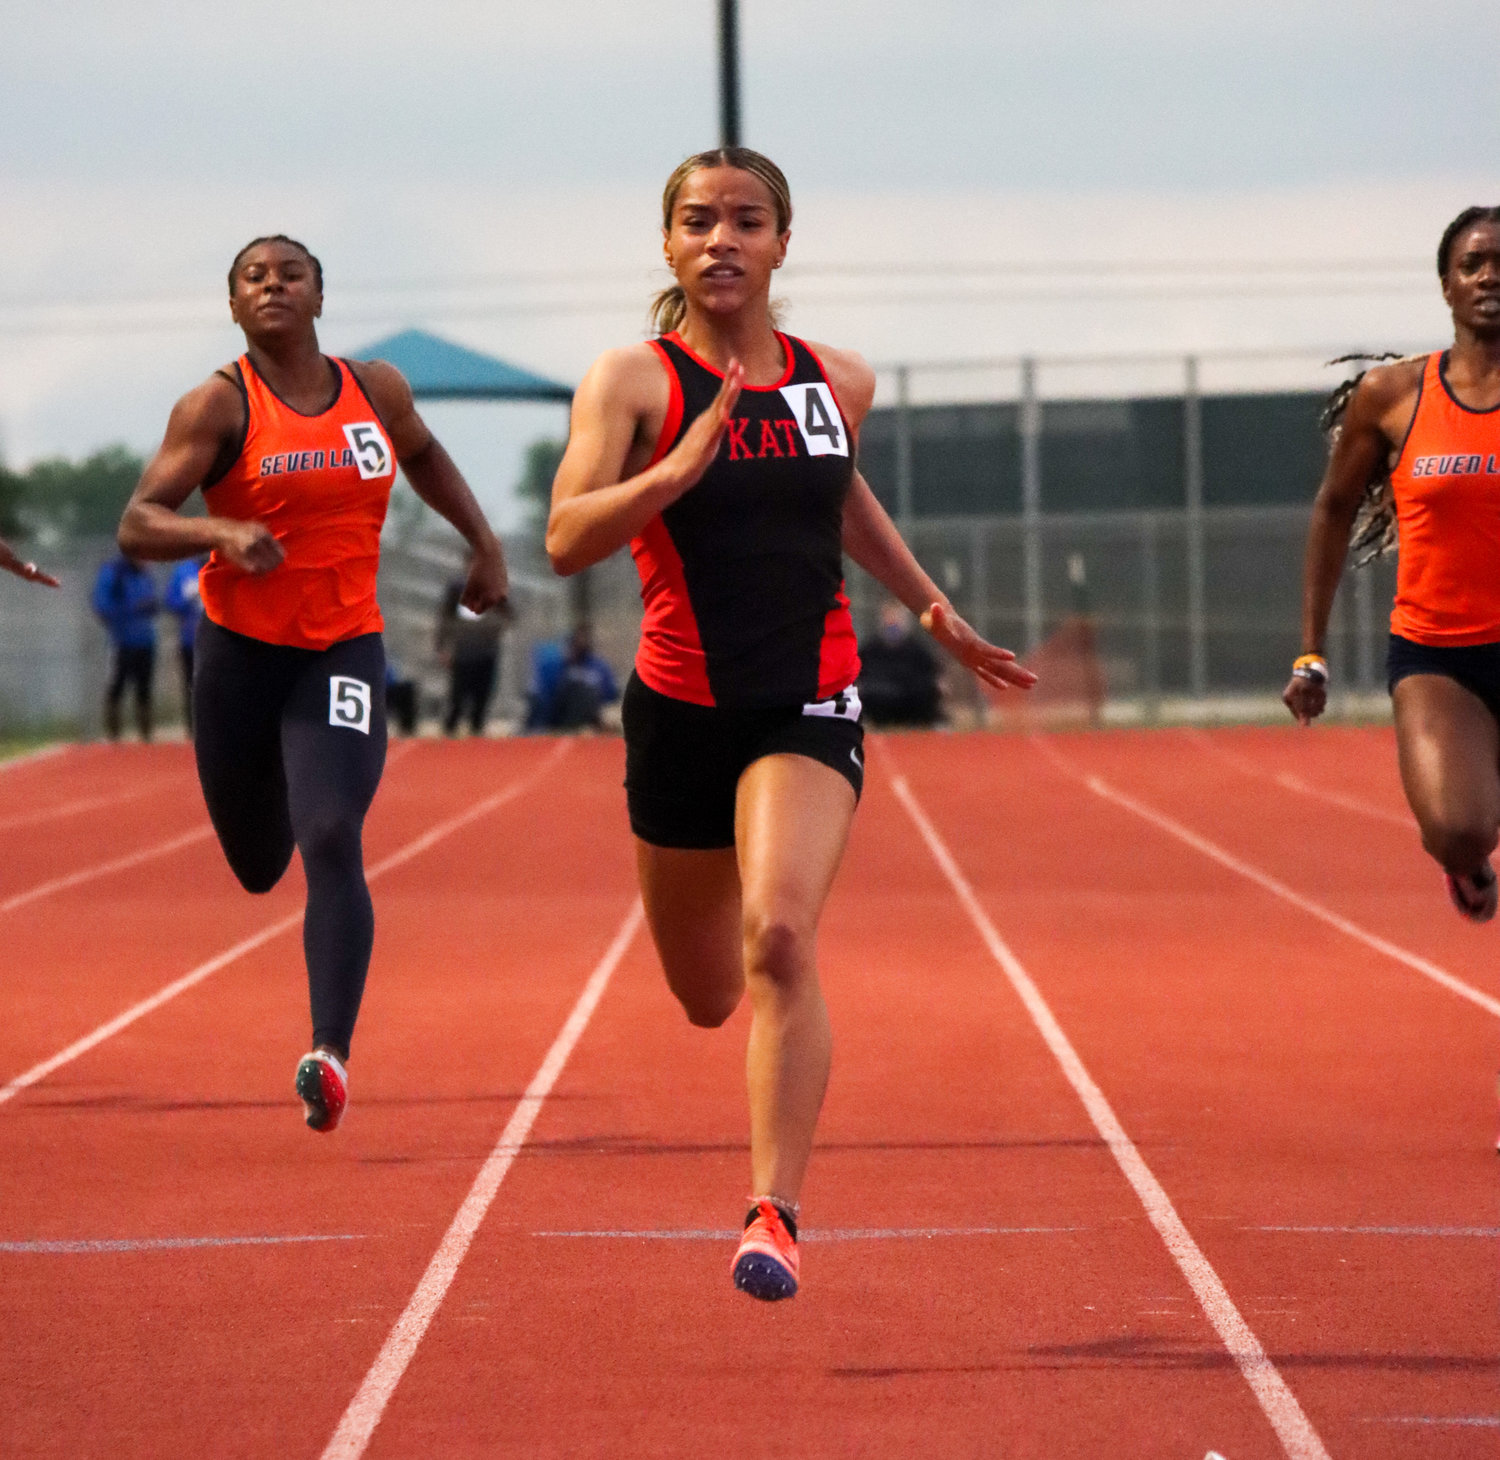 Katy High junior Jada Campos won gold in the 100-meter dash and 200-meter dash and helped the Tigers’ 4x400 relay to a fourth-place finish at the 19-20-6A area meet on Thursday, April 15, at Paetow High.